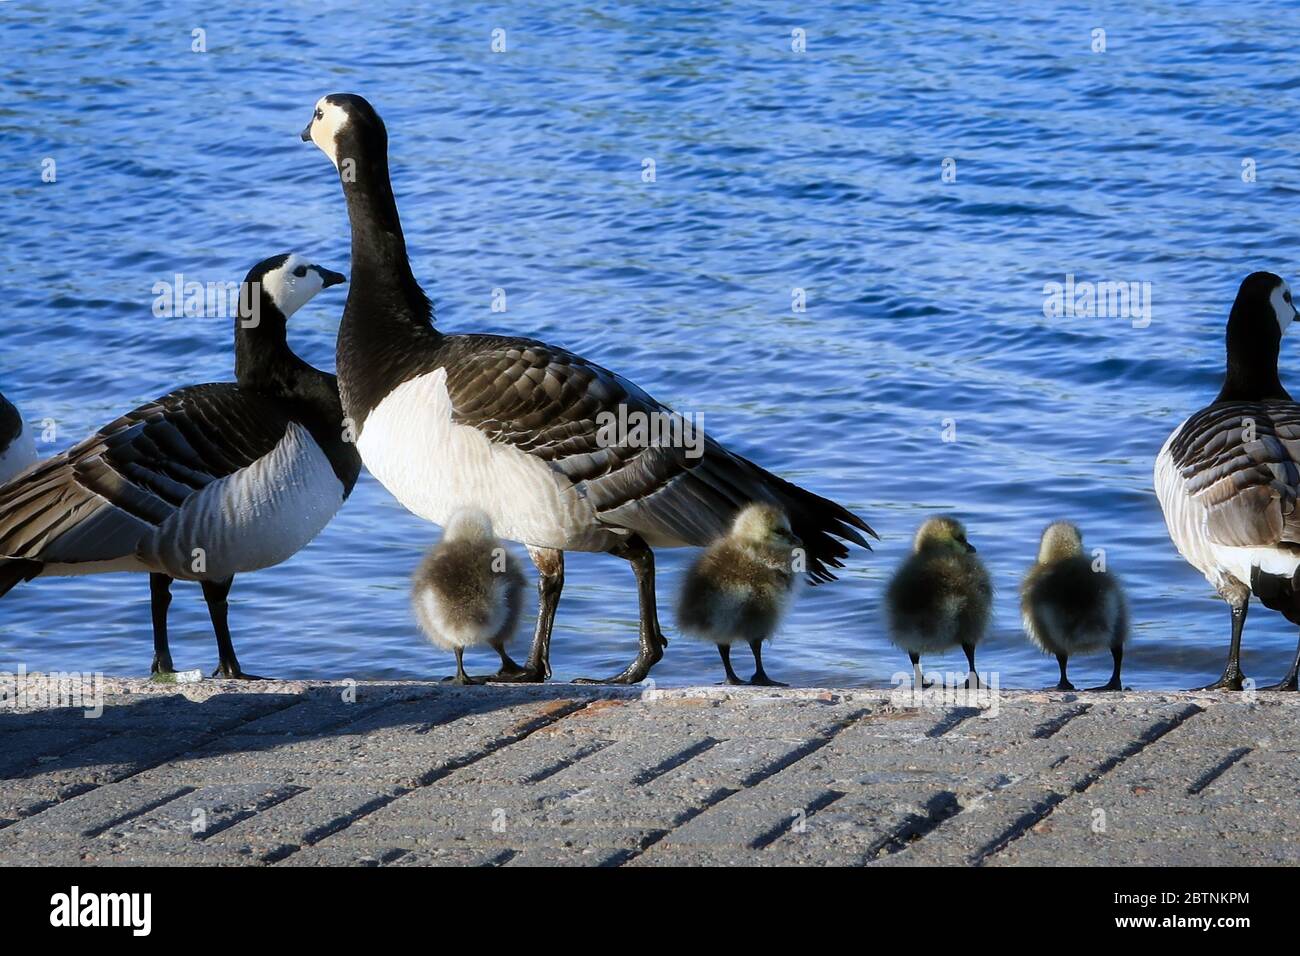 Family of Barnacle geese, Branta leucopsis, with four young fuzzy goslings standing by the seashore before jumping in the water. Helsinki, Finland. Stock Photo